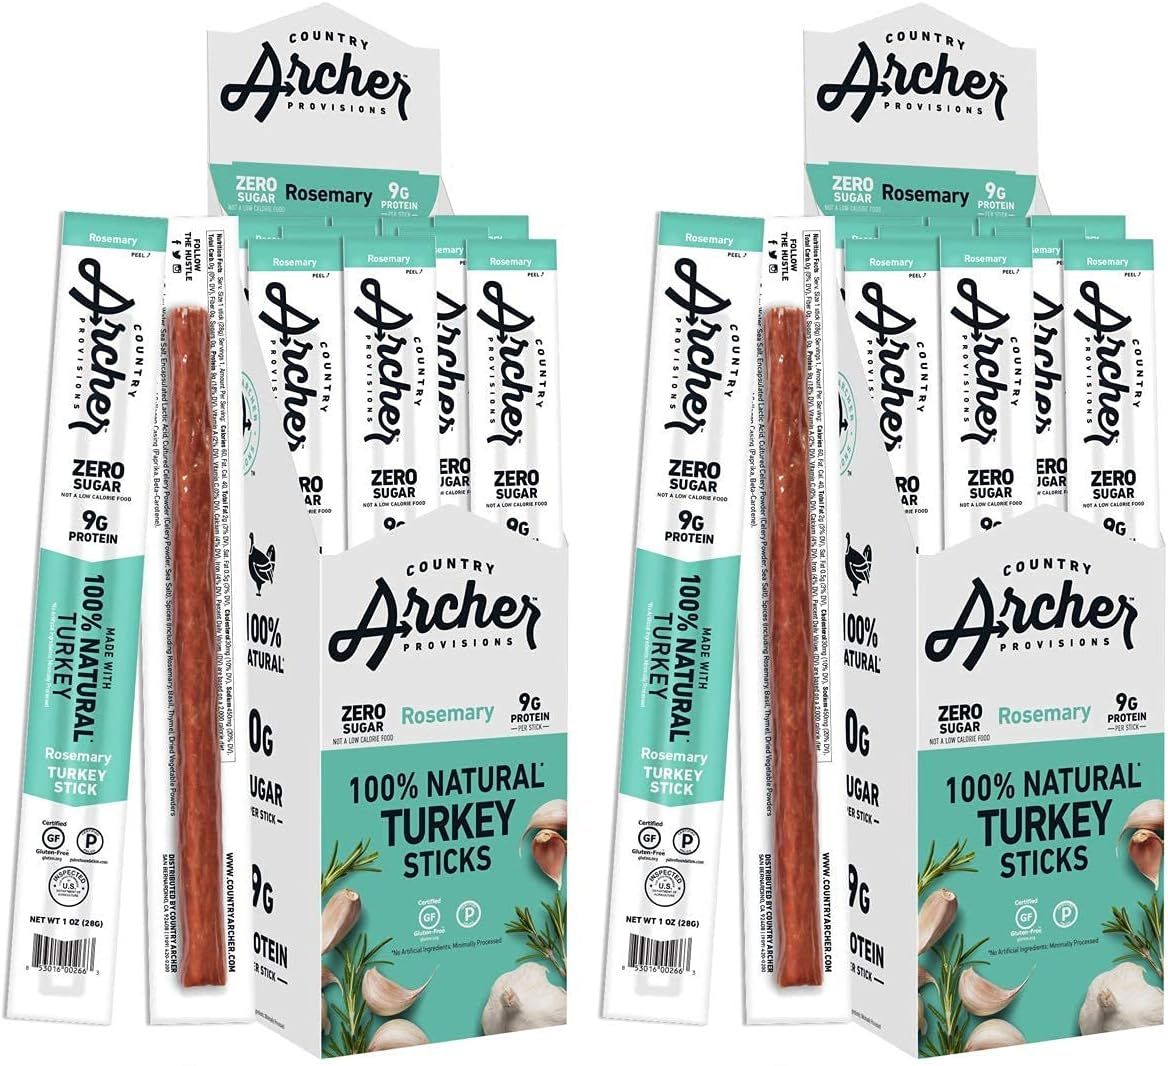 Rosemary Turkey Sticks by Country Archer, 100% Natural, Gluten Free, Keto Snacks, 1 Ounce, 18 Count | Amazon (US)